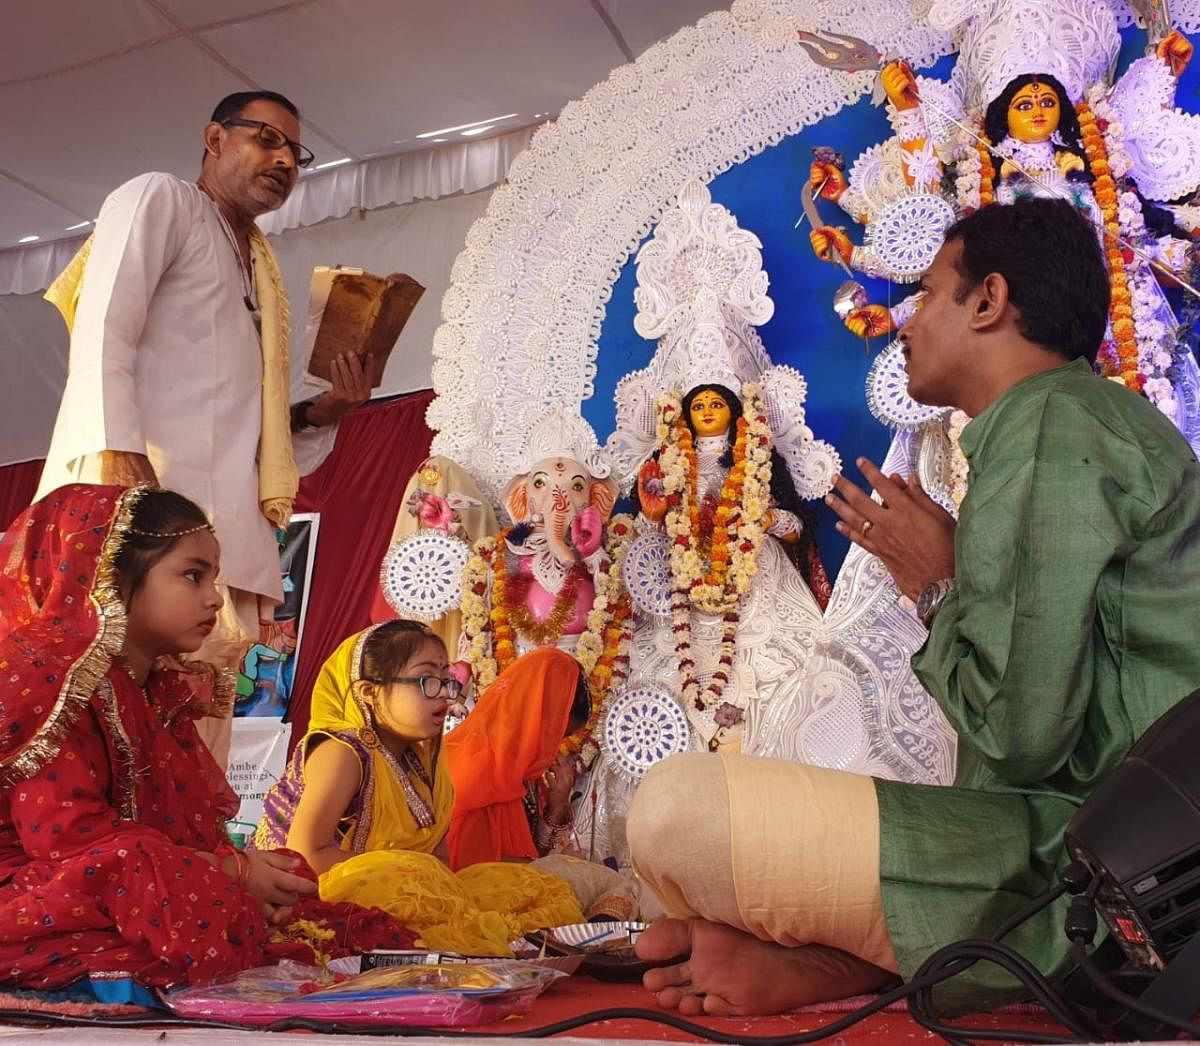 Izna Ali (dressed in red) is being worshipped during the Kumari Puja ritual. Special arrangement